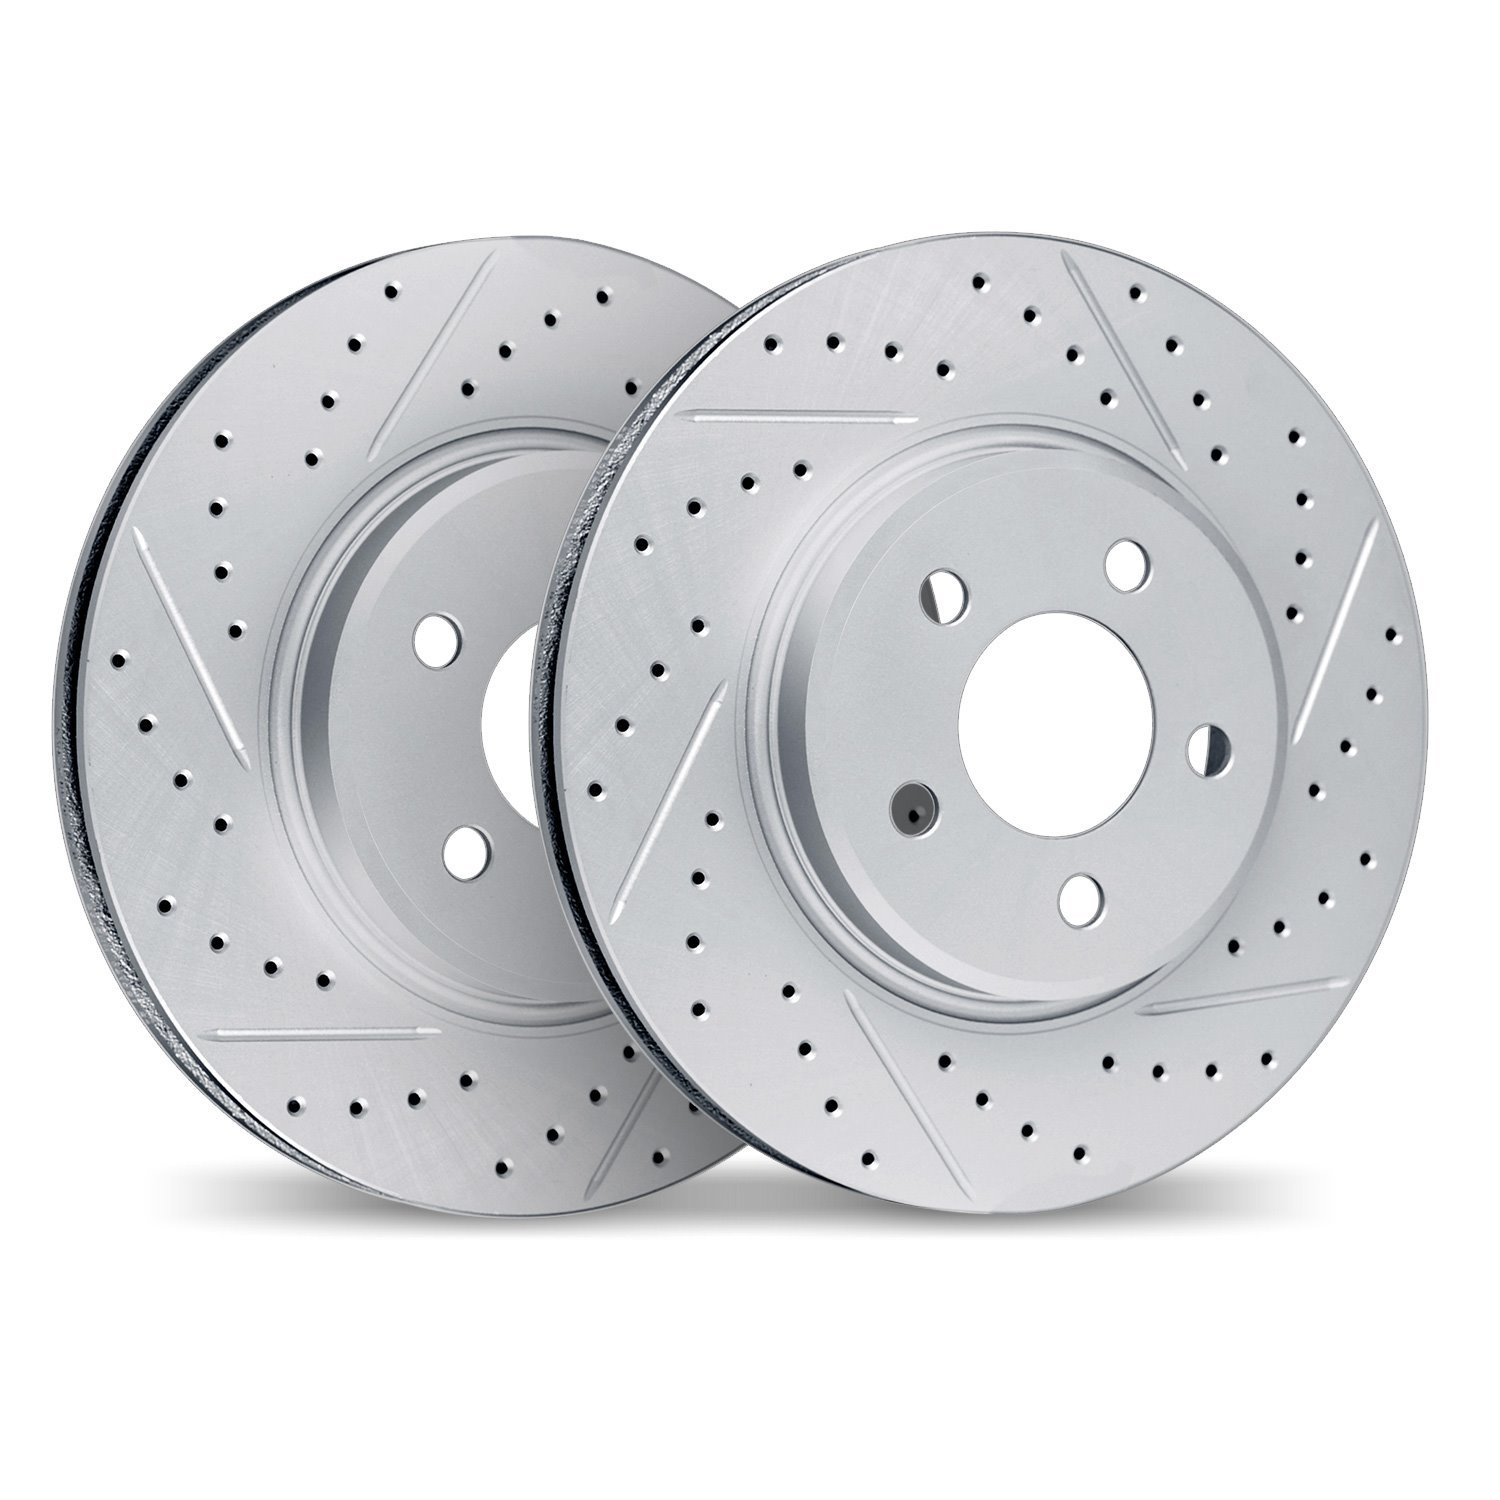 2002-80026 Geoperformance Drilled/Slotted Brake Rotors, 2004-2008 Ford/Lincoln/Mercury/Mazda, Position: Front